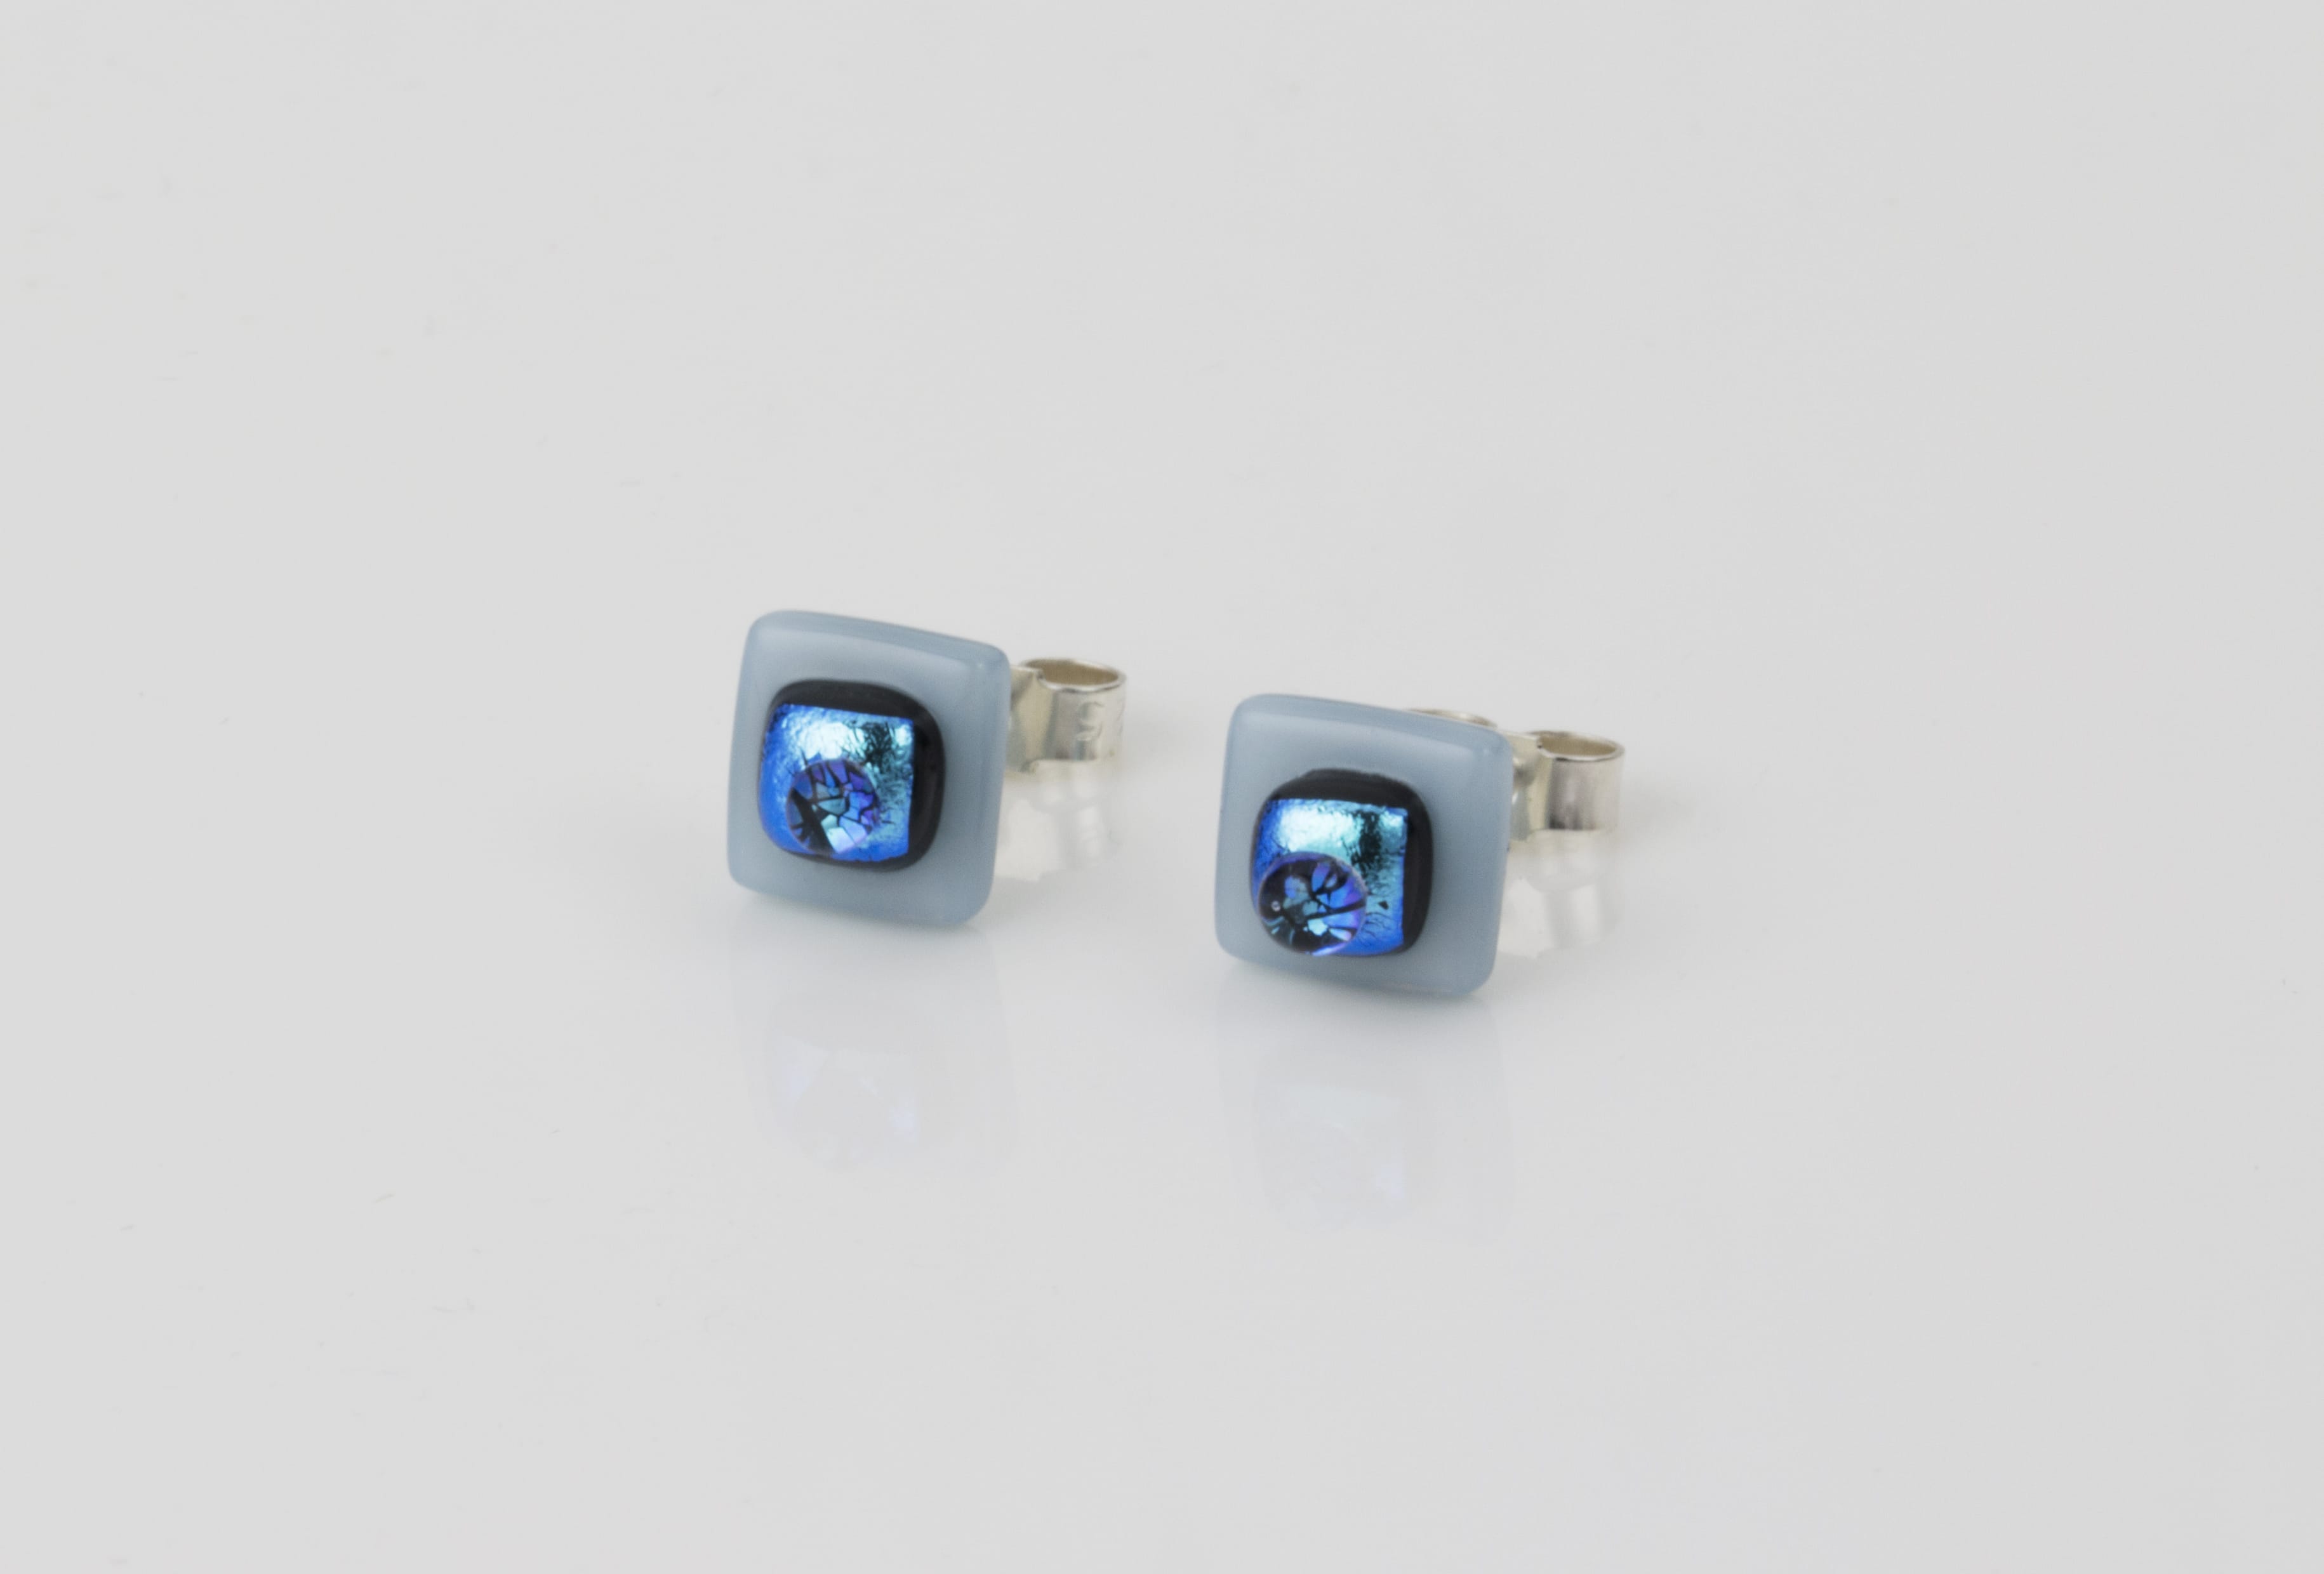 Dichroic glass jewellery uk, handmade stud earrings - turquoise opal/dichroic/clear glass stack. 10mm square, sterling silver